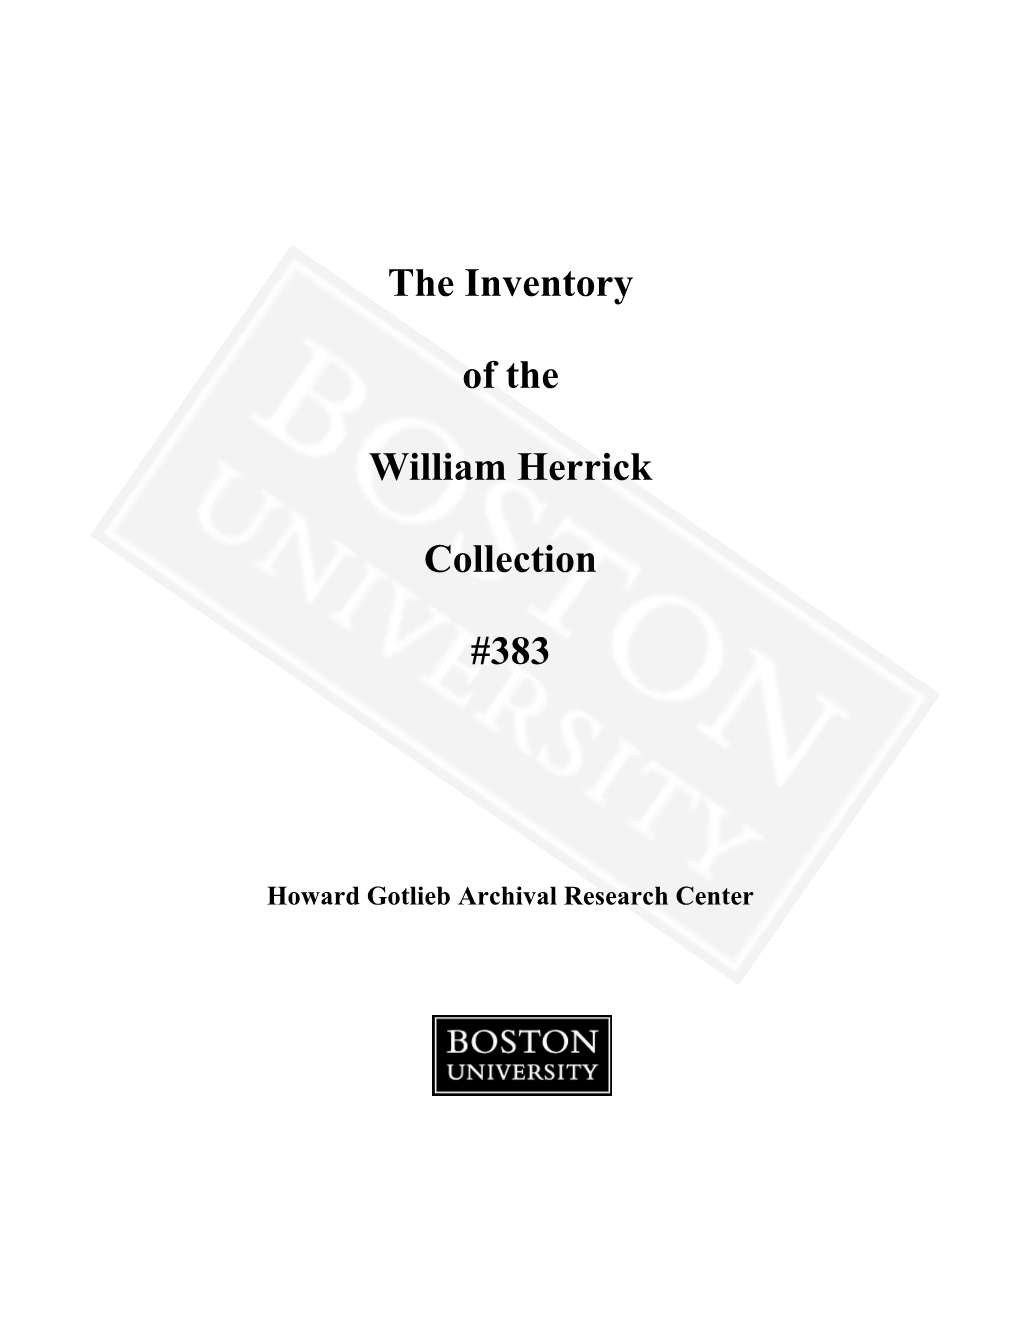 The Inventory of the William Herrick Collection #383